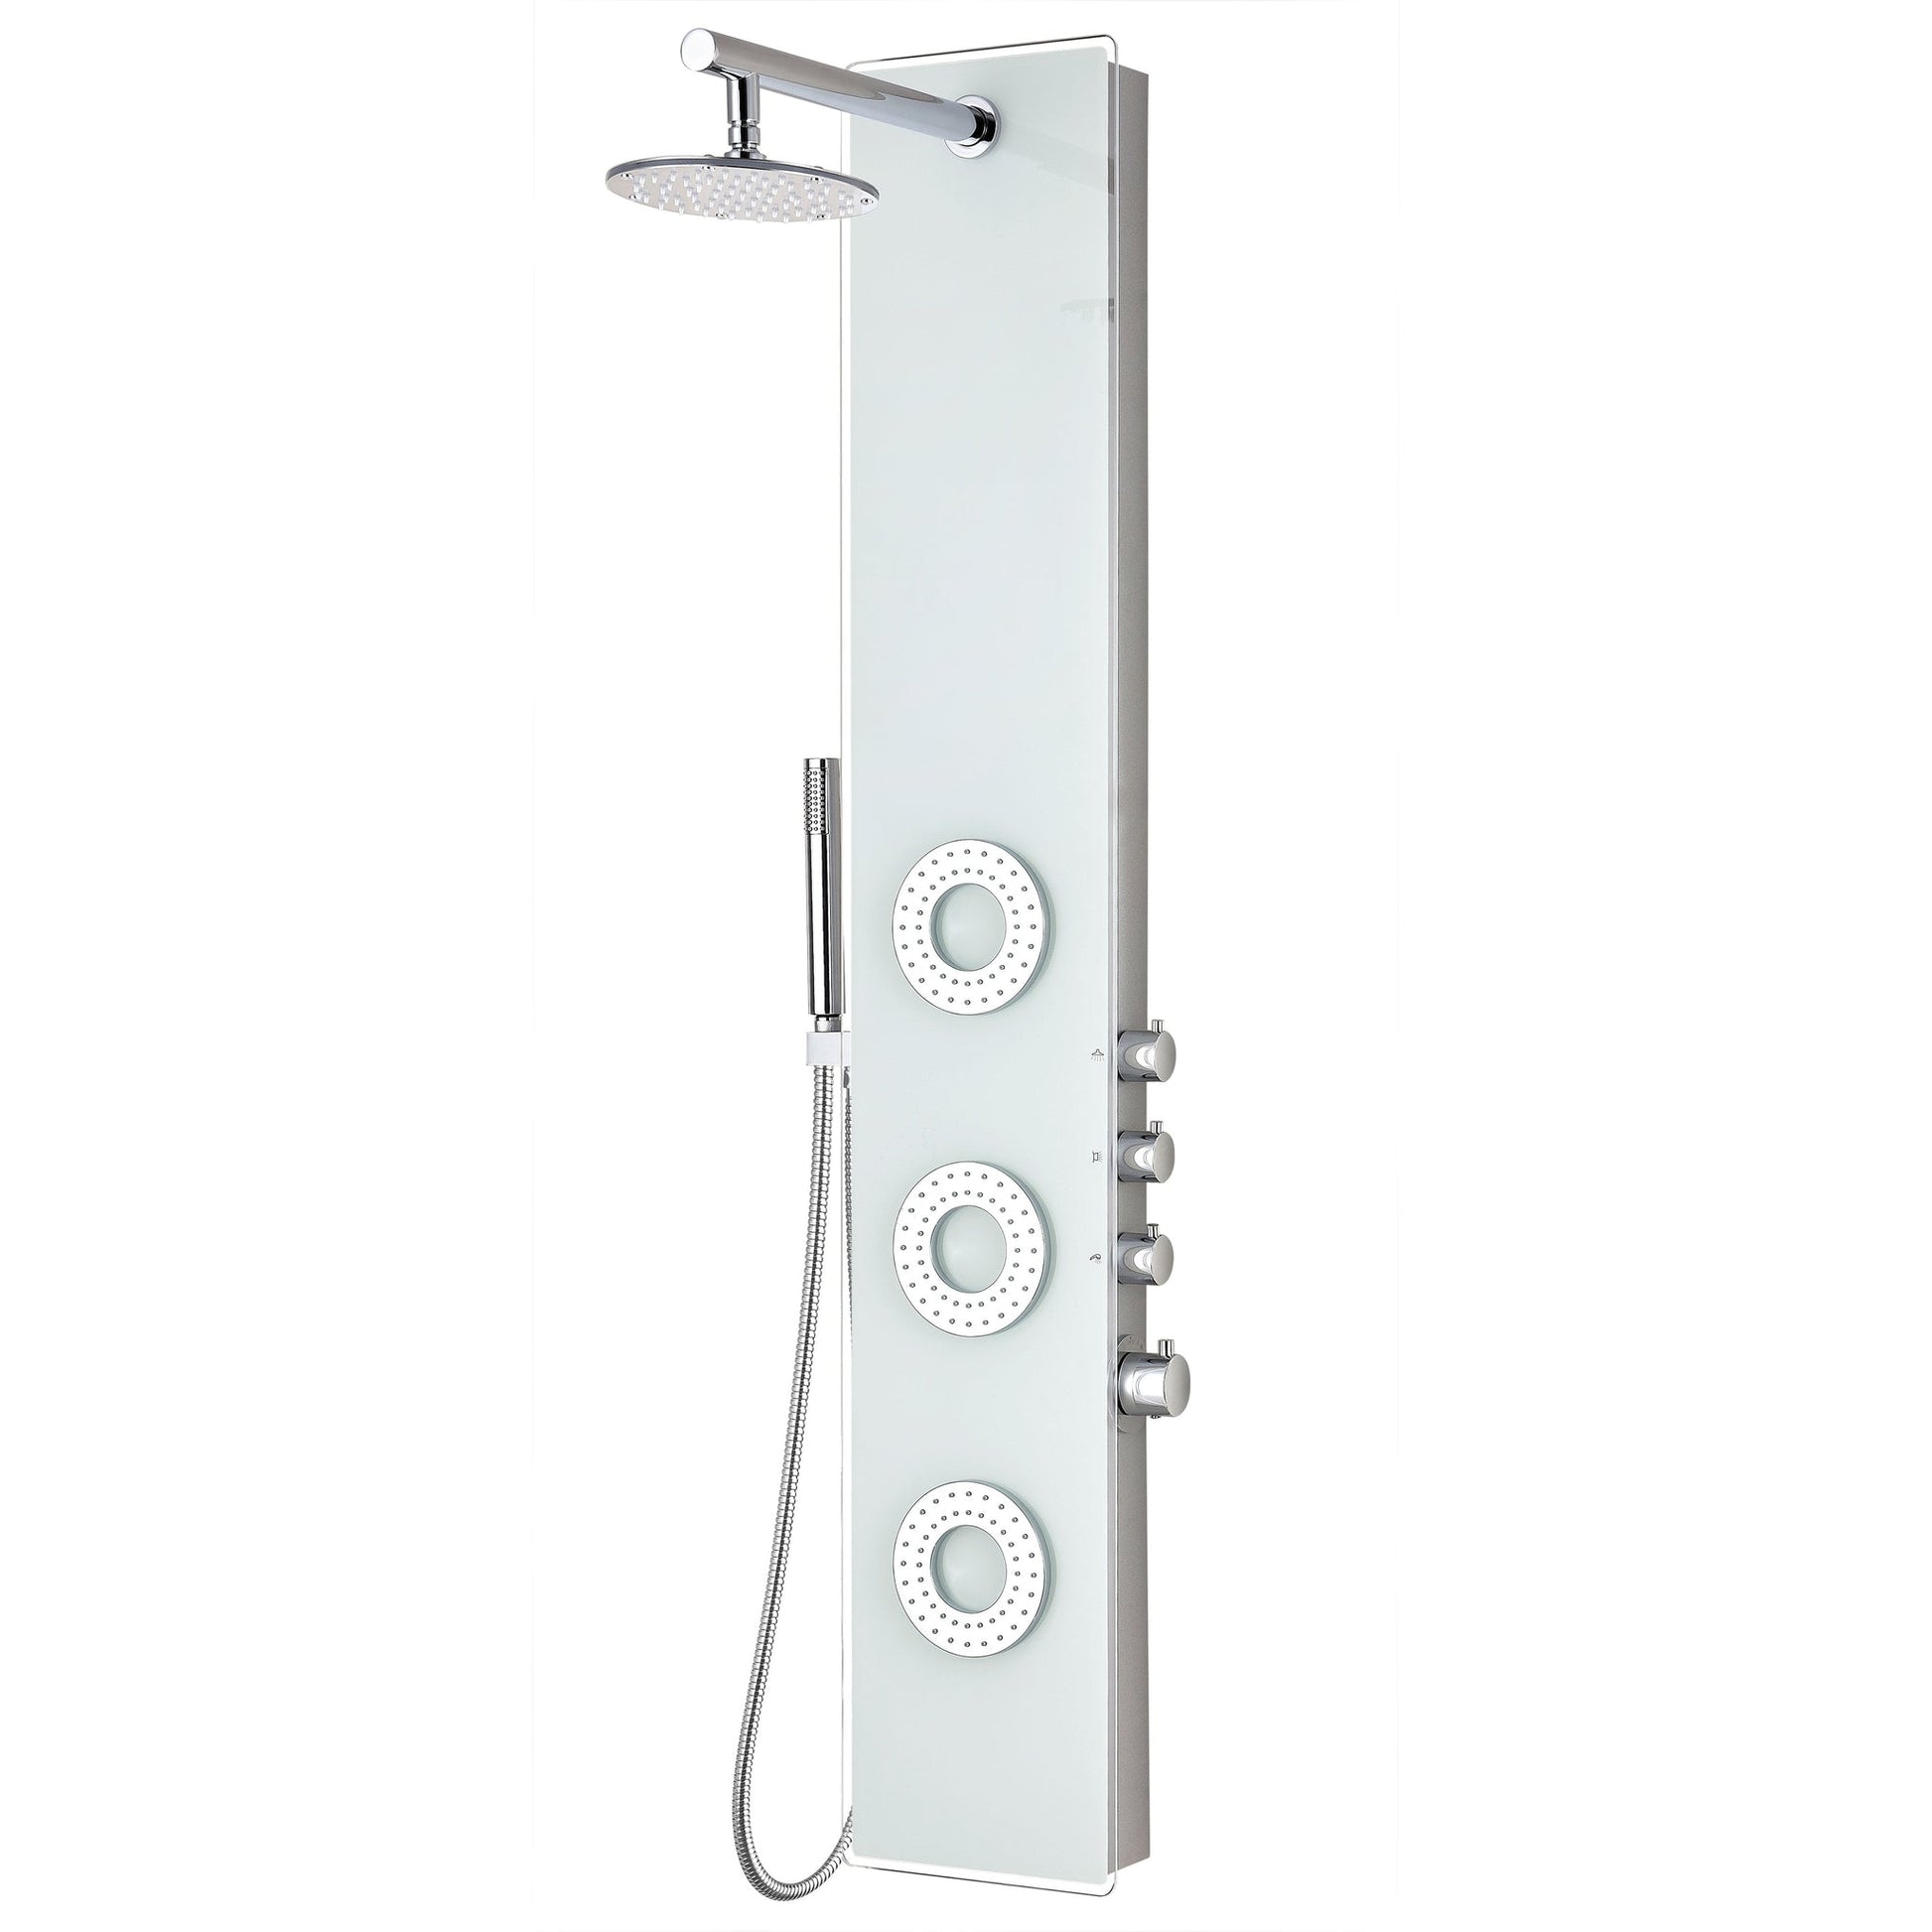 ANZZI Lynx Series 58" White 3-Jetted Full Body Shower Panel With Heavy Rain Shower Head and Euro-Grip Hand Sprayer